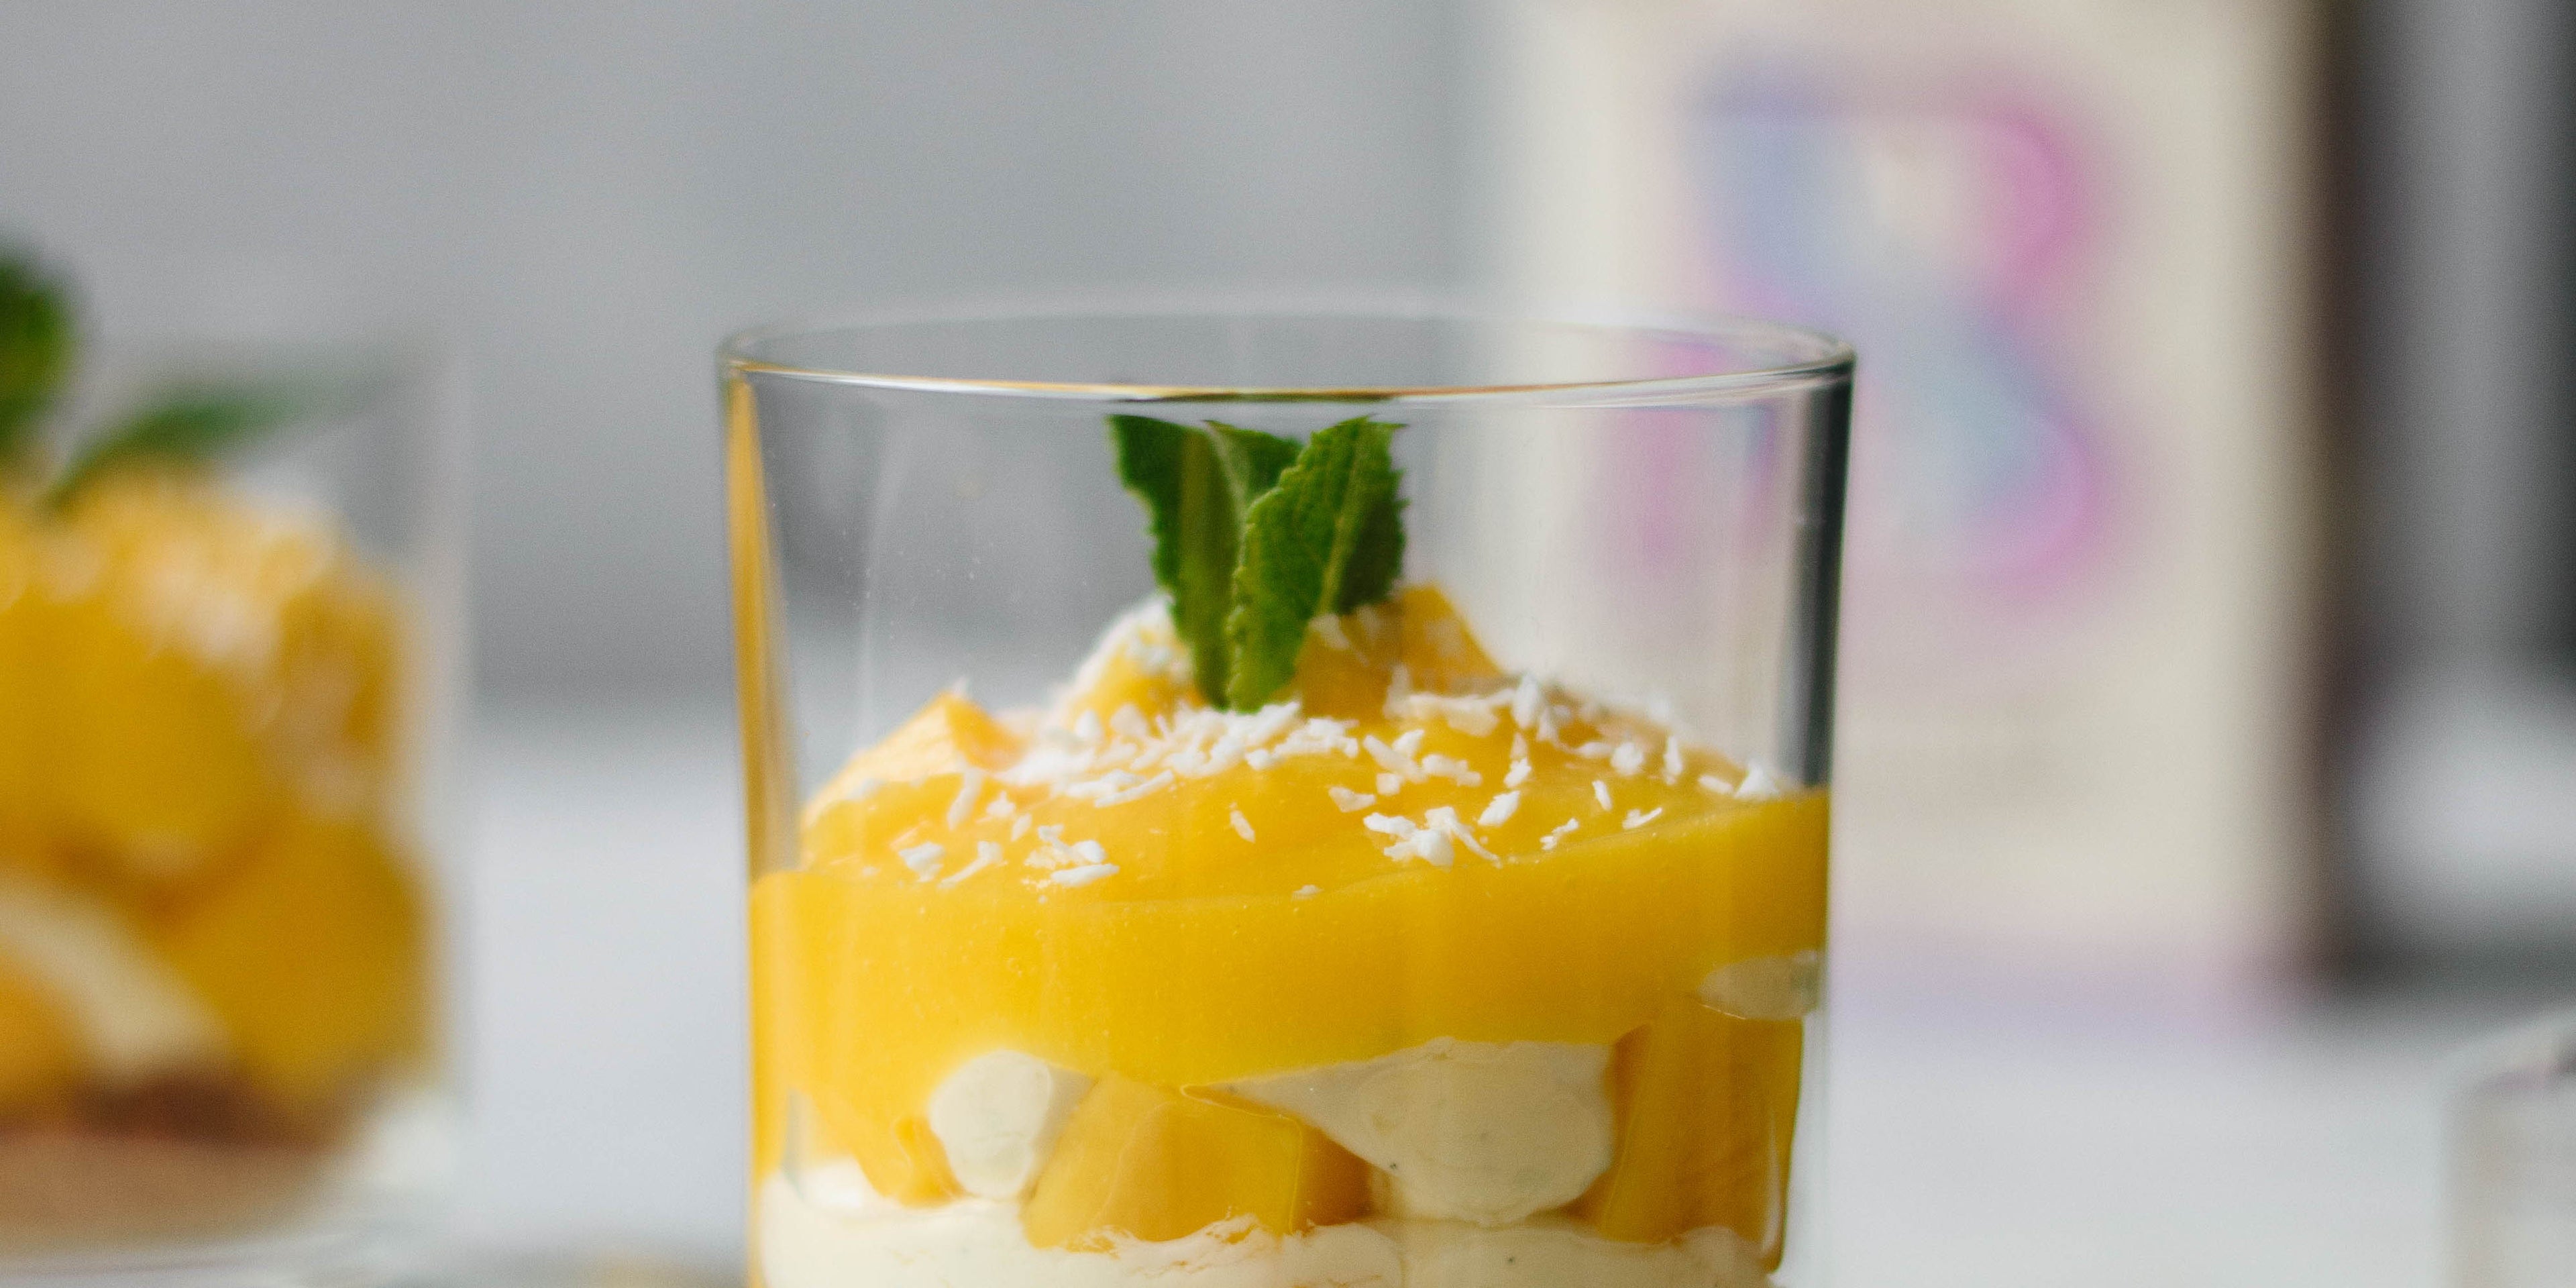 Close up of small glass of mango syllabub with sprig of mint on top